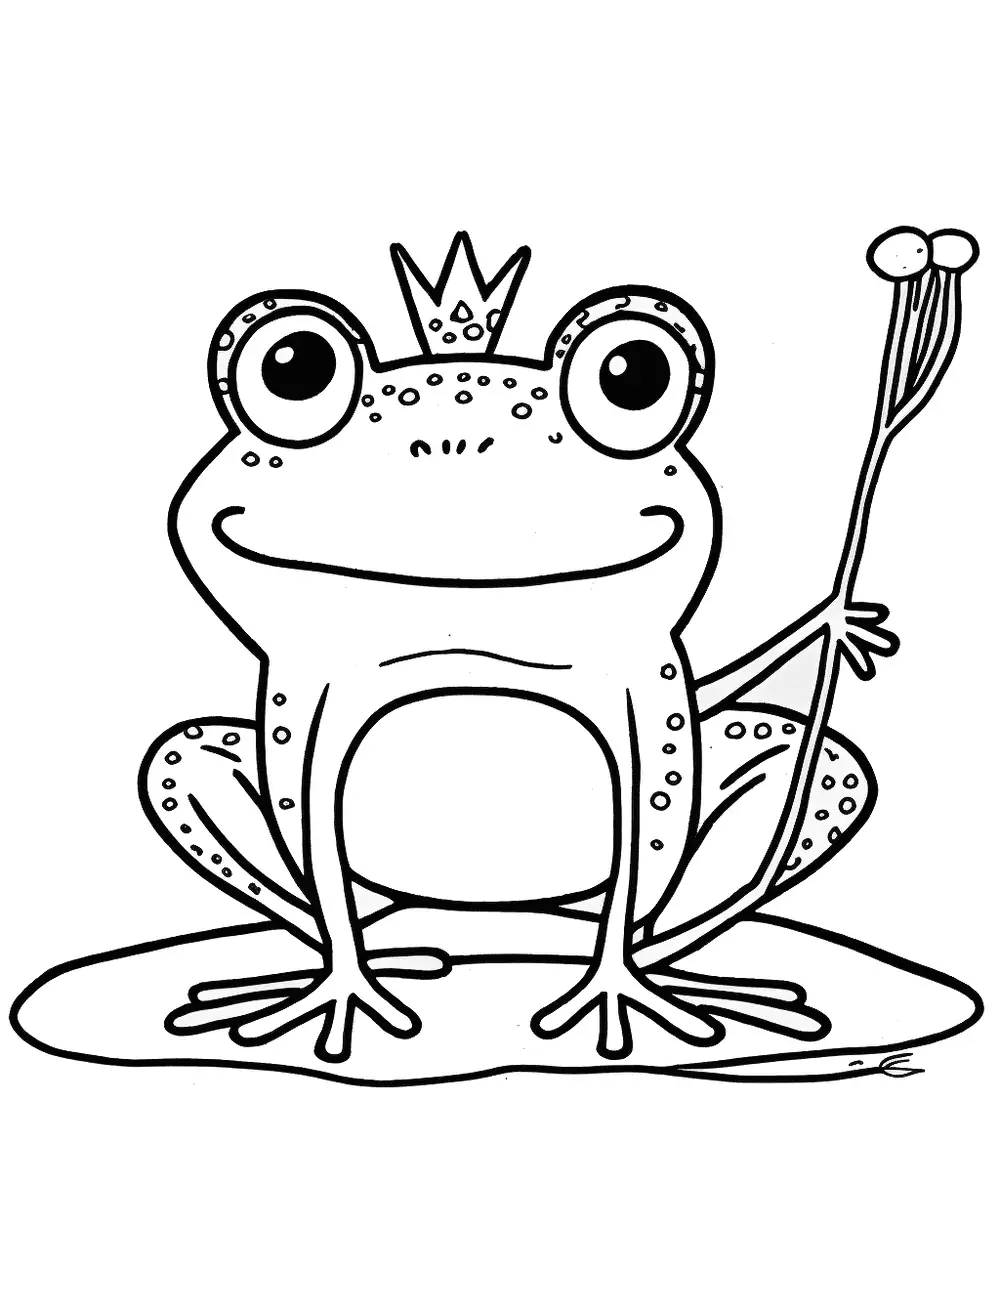 Frog Prince Coloring Page - A frog prince with a crown and a royal scepter.